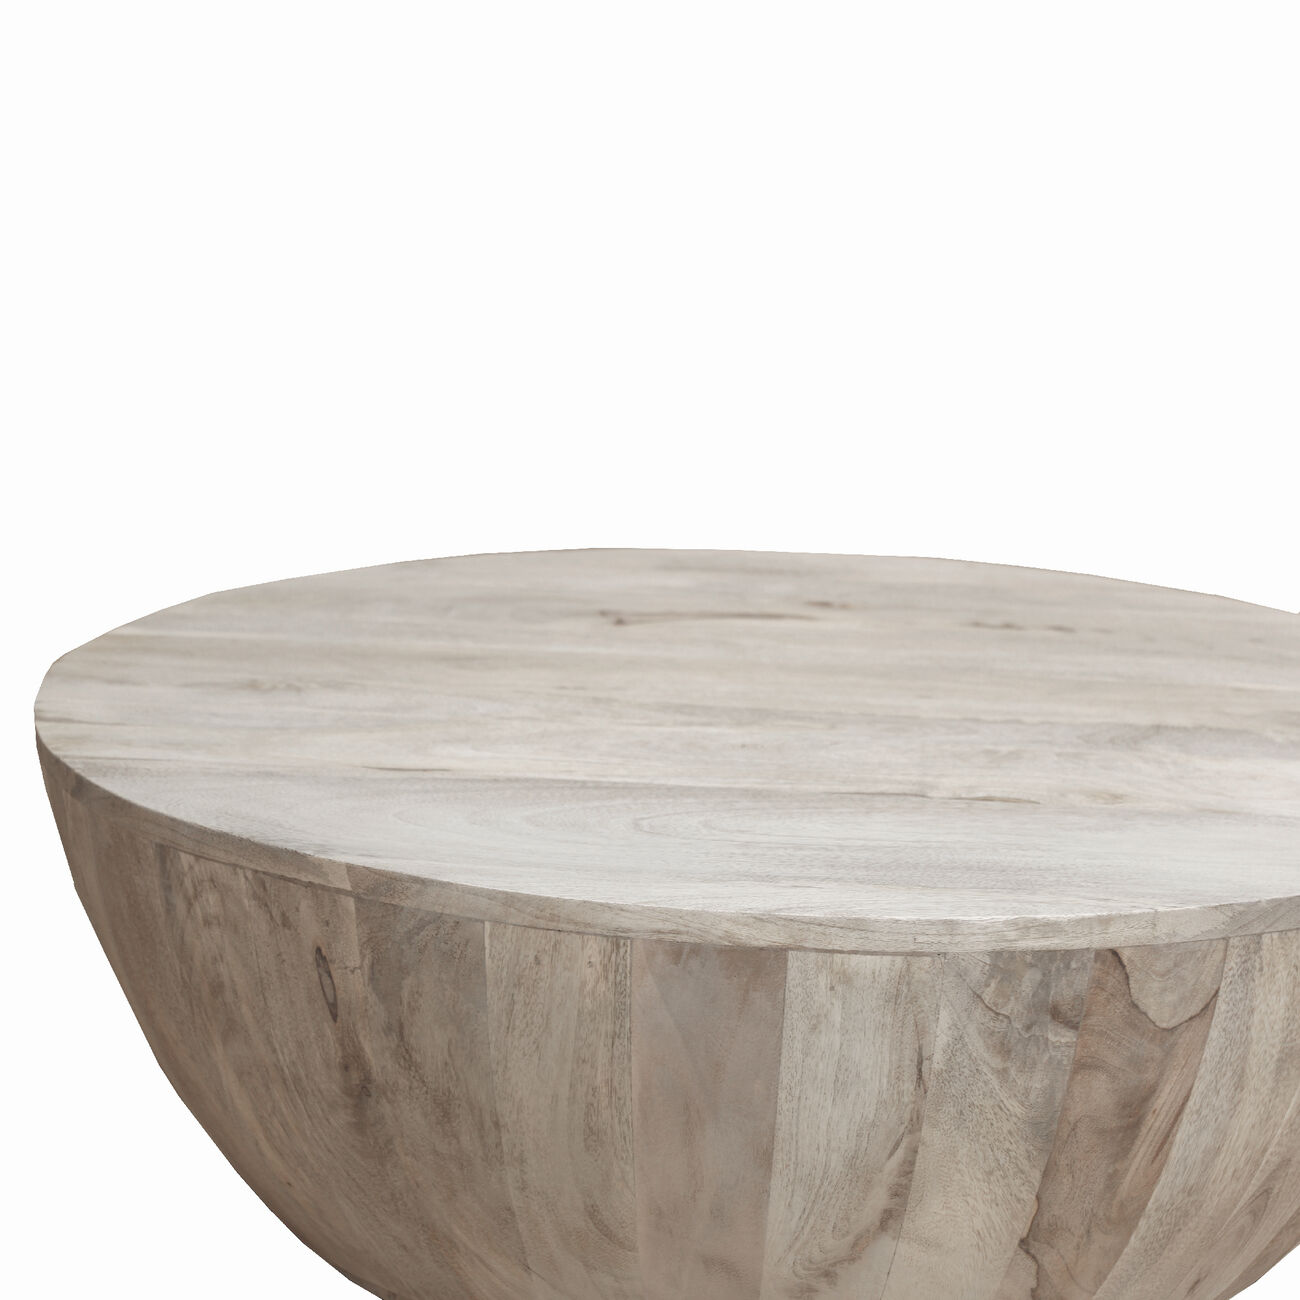 Distressed Mango Wood Coffee Table in Round Shape, Washed Light Brown